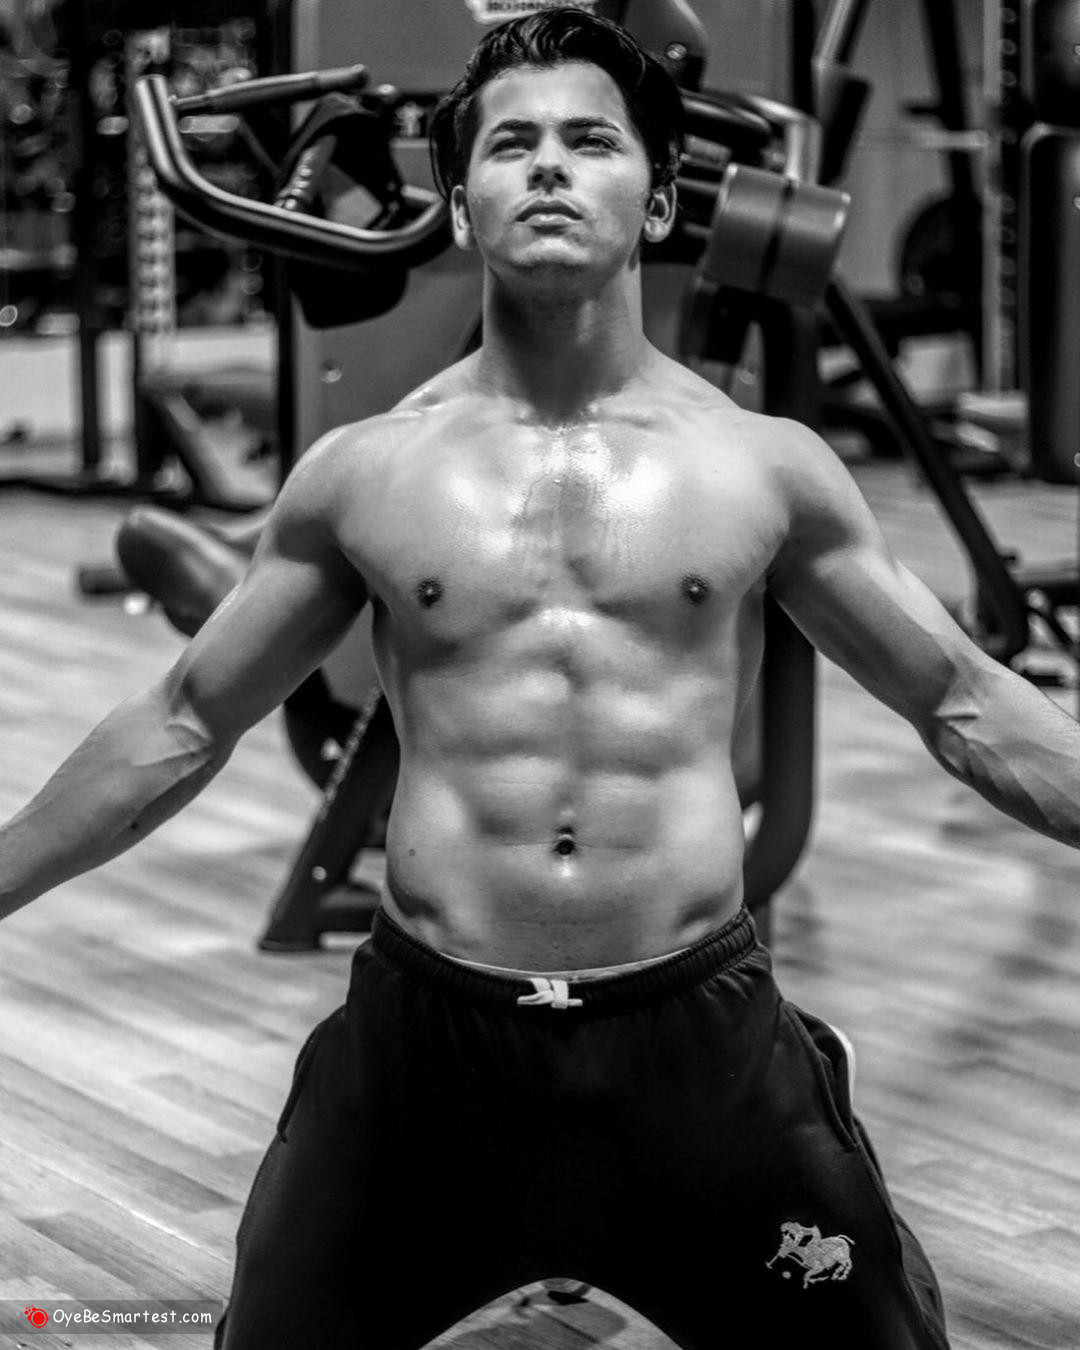 🔥 Siddharth Nigam Abs Six Pack Body pics wallpaper hd Free Download